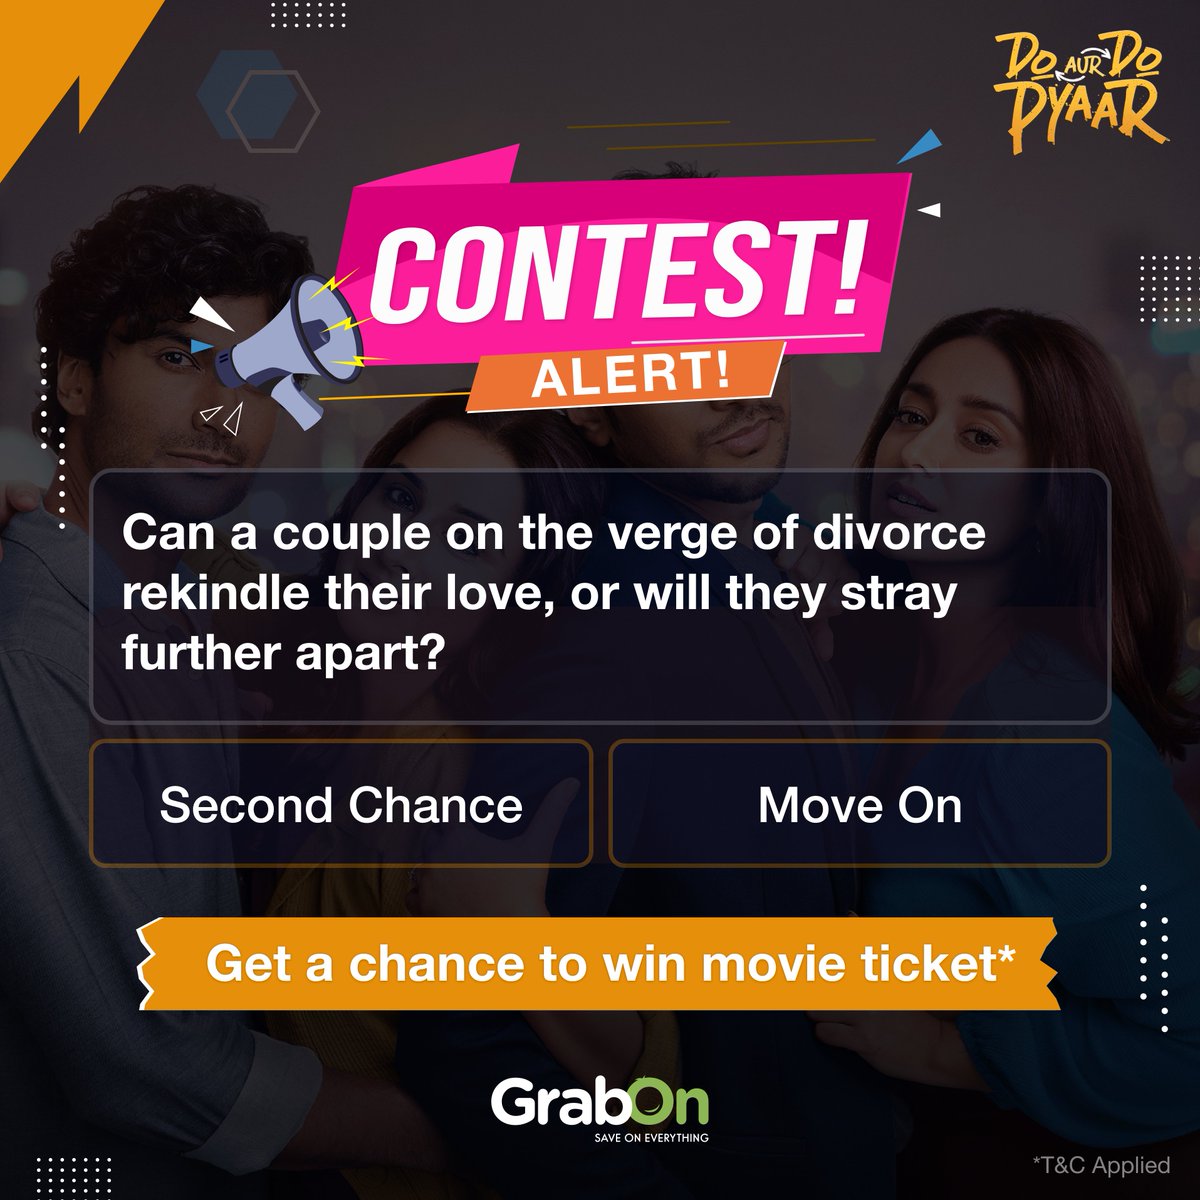 #ContestAlert To celebrate the release of this steamy new movie, we're giving away movie tickets! Here's how to win: 😍Like this post and follow us! 😍Tell us in the comments: Team 'Second Chance' or Team 'Move On'? #GrabOn #SaveOnEverything #Contest #DoAurDoPyaar #Contest